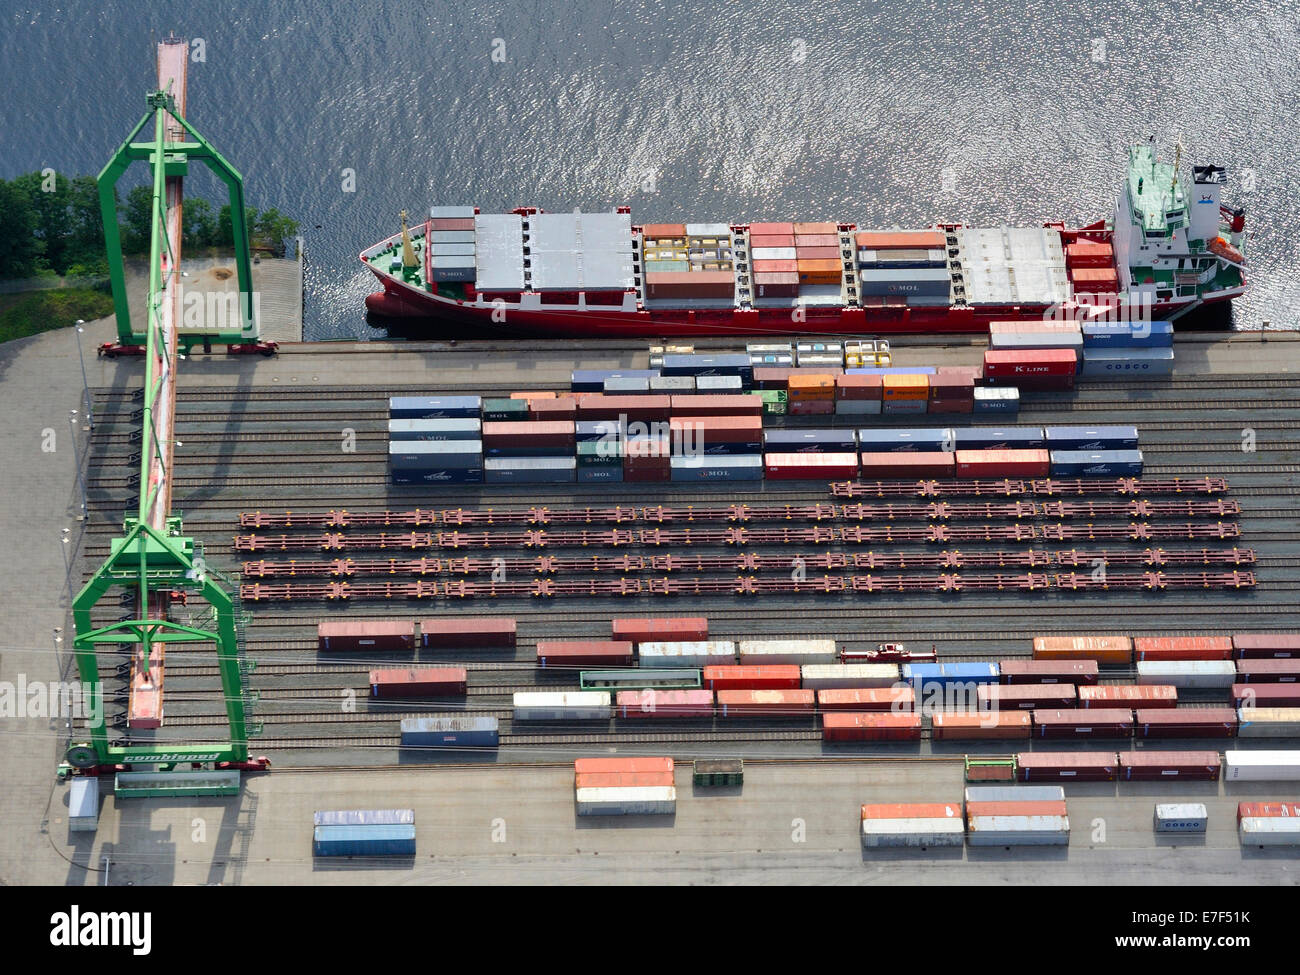 Aerial view, loading containers from ship on rail, Container Terminal Lübeck, Lübeck, Schleswig-Holstein, Germany Stock Photo